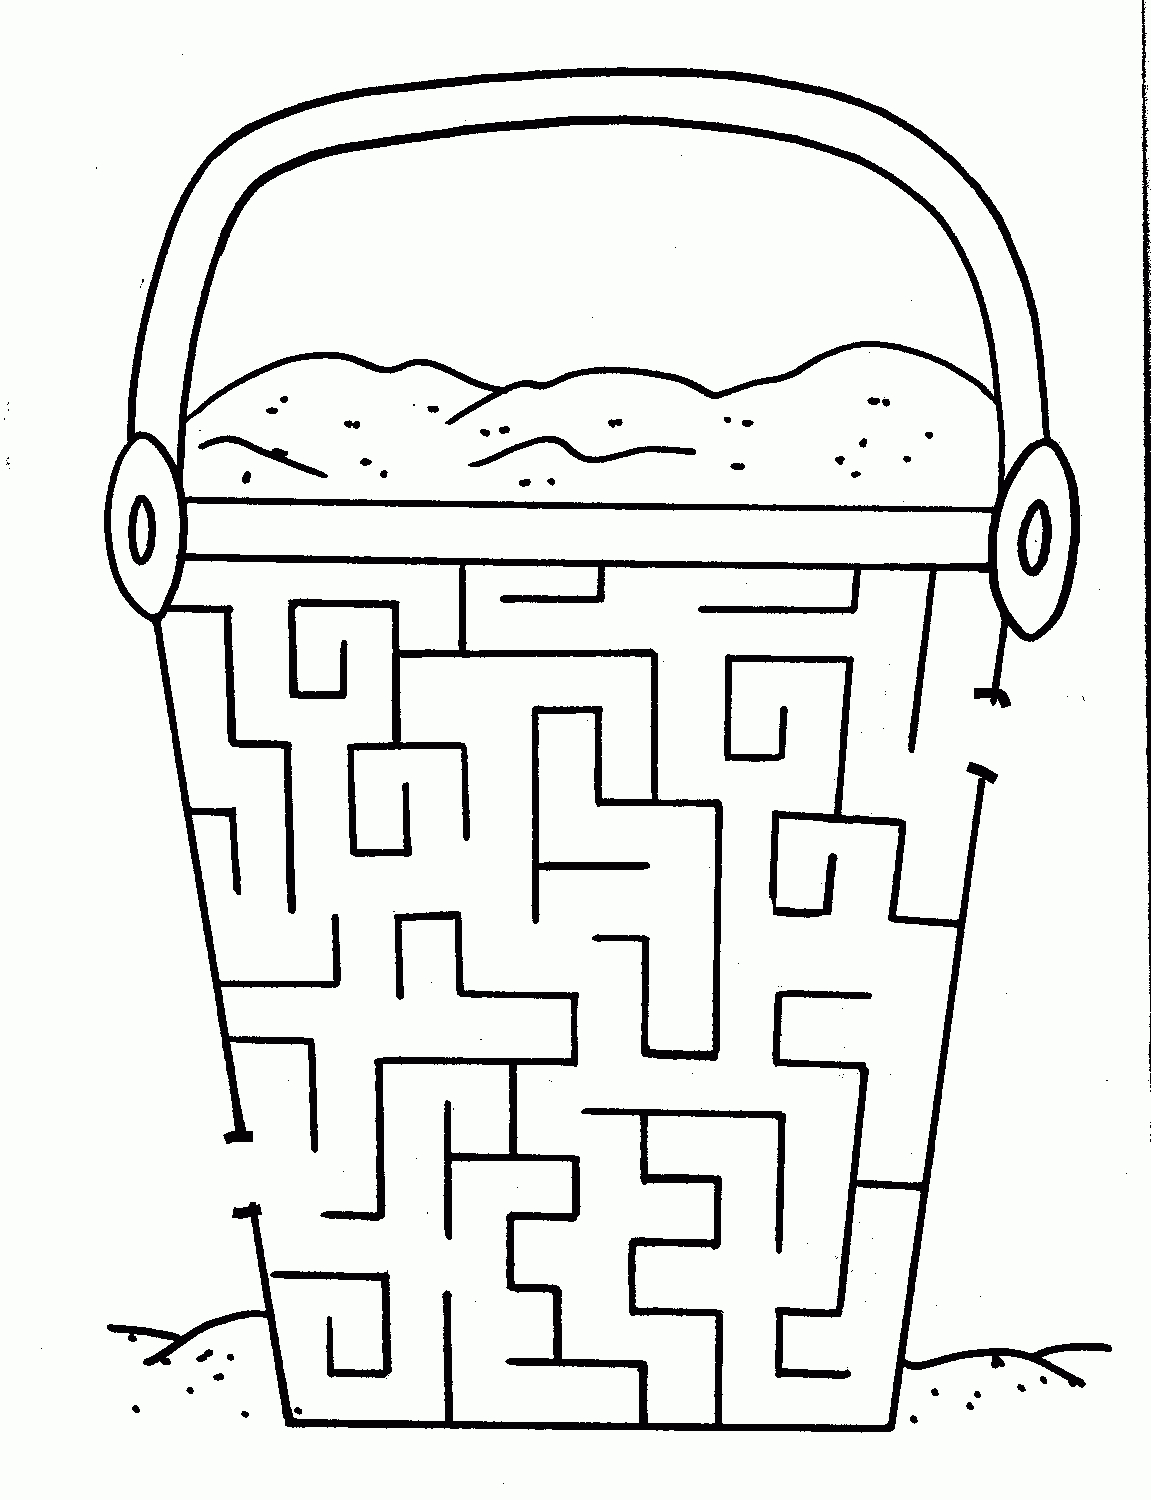 Try Your Hand At Our Free Printable Mazes For Kids. | Under The Sea - Free Printable Mazes